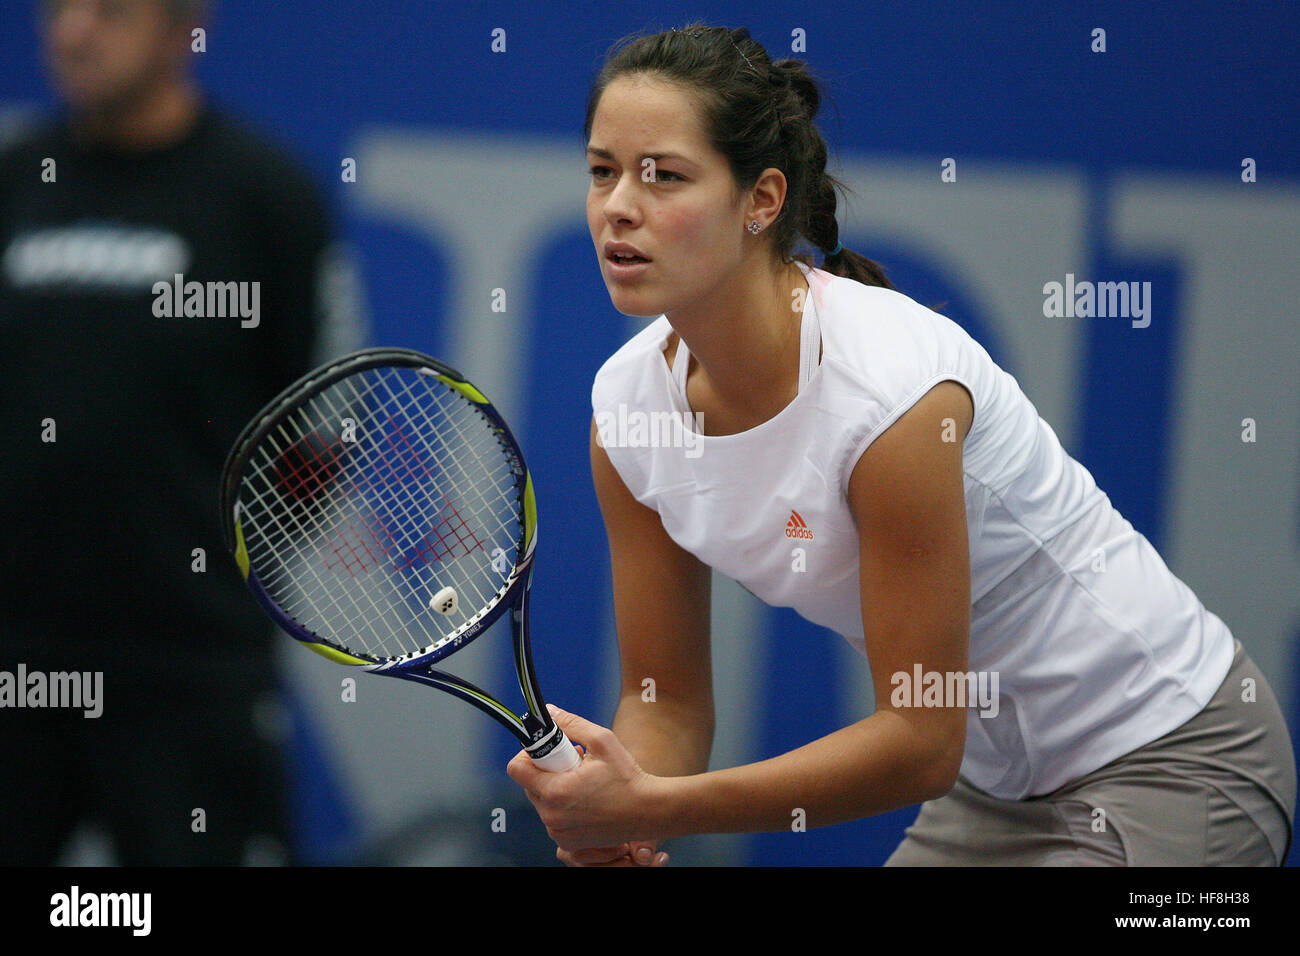 Linz, Austria. 23rd Oct, 2008. Ana Ivanovic from Serbia awaits a serve from  Austrian opponent Bammer in their second round match at the Generali Ladies  2008 tennis tournament in Linz, Austria, 23.10.2008.